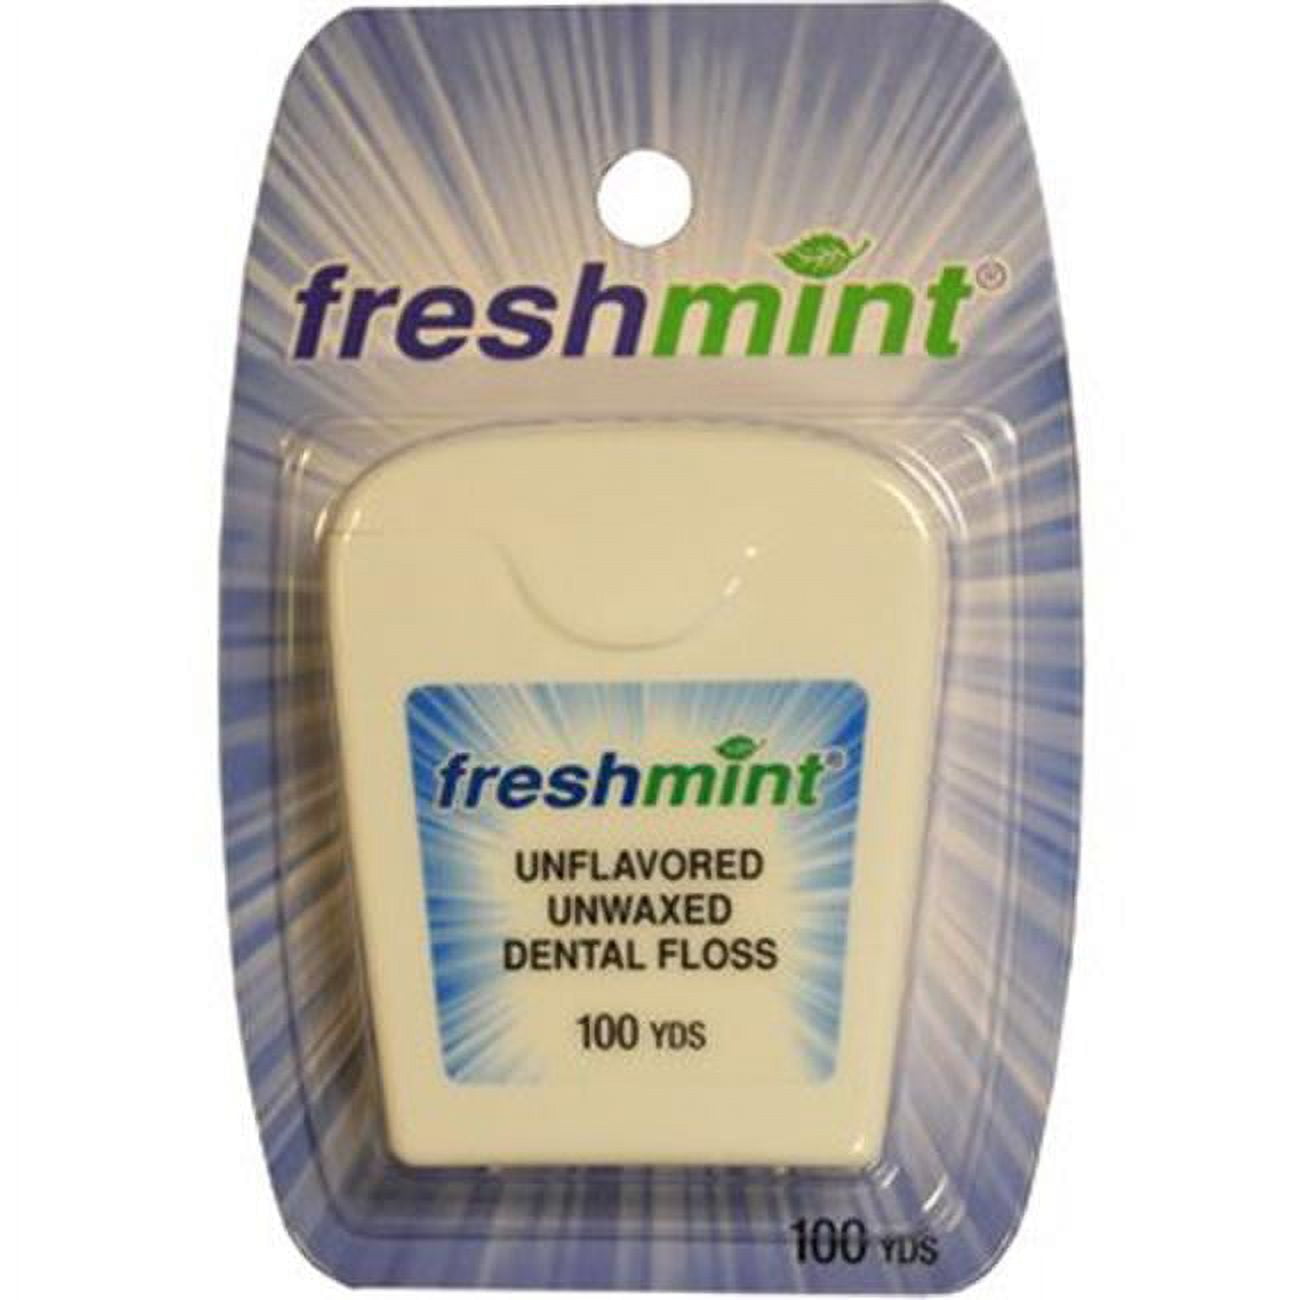 Picture of DDI 2286446 Freshmint Dental Floss -100 yards  Unwaxed/Unflavored Case of 72